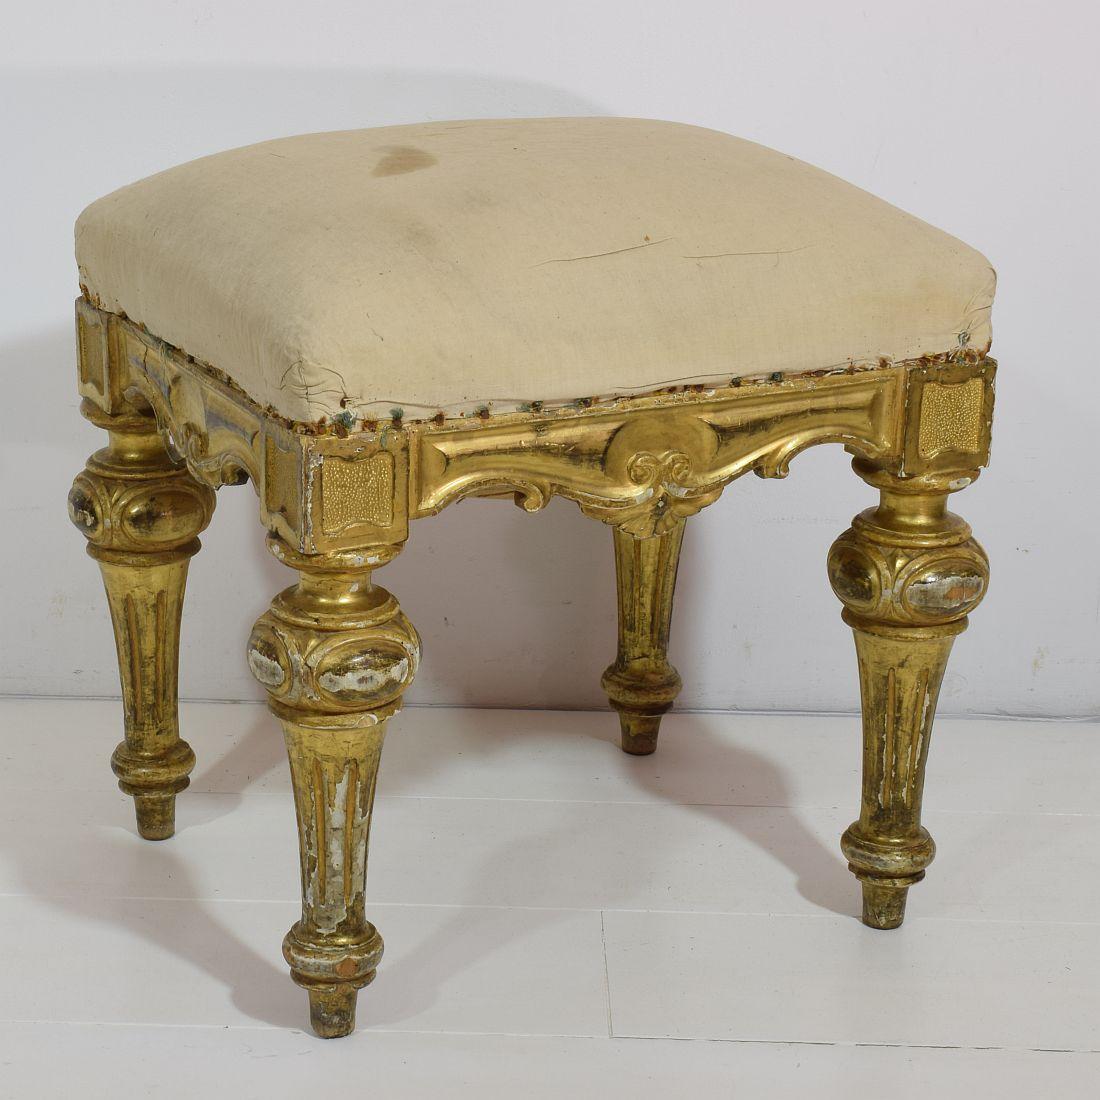 Wood 19th Century Spanish Gilded and Carved Stool or Tabouret